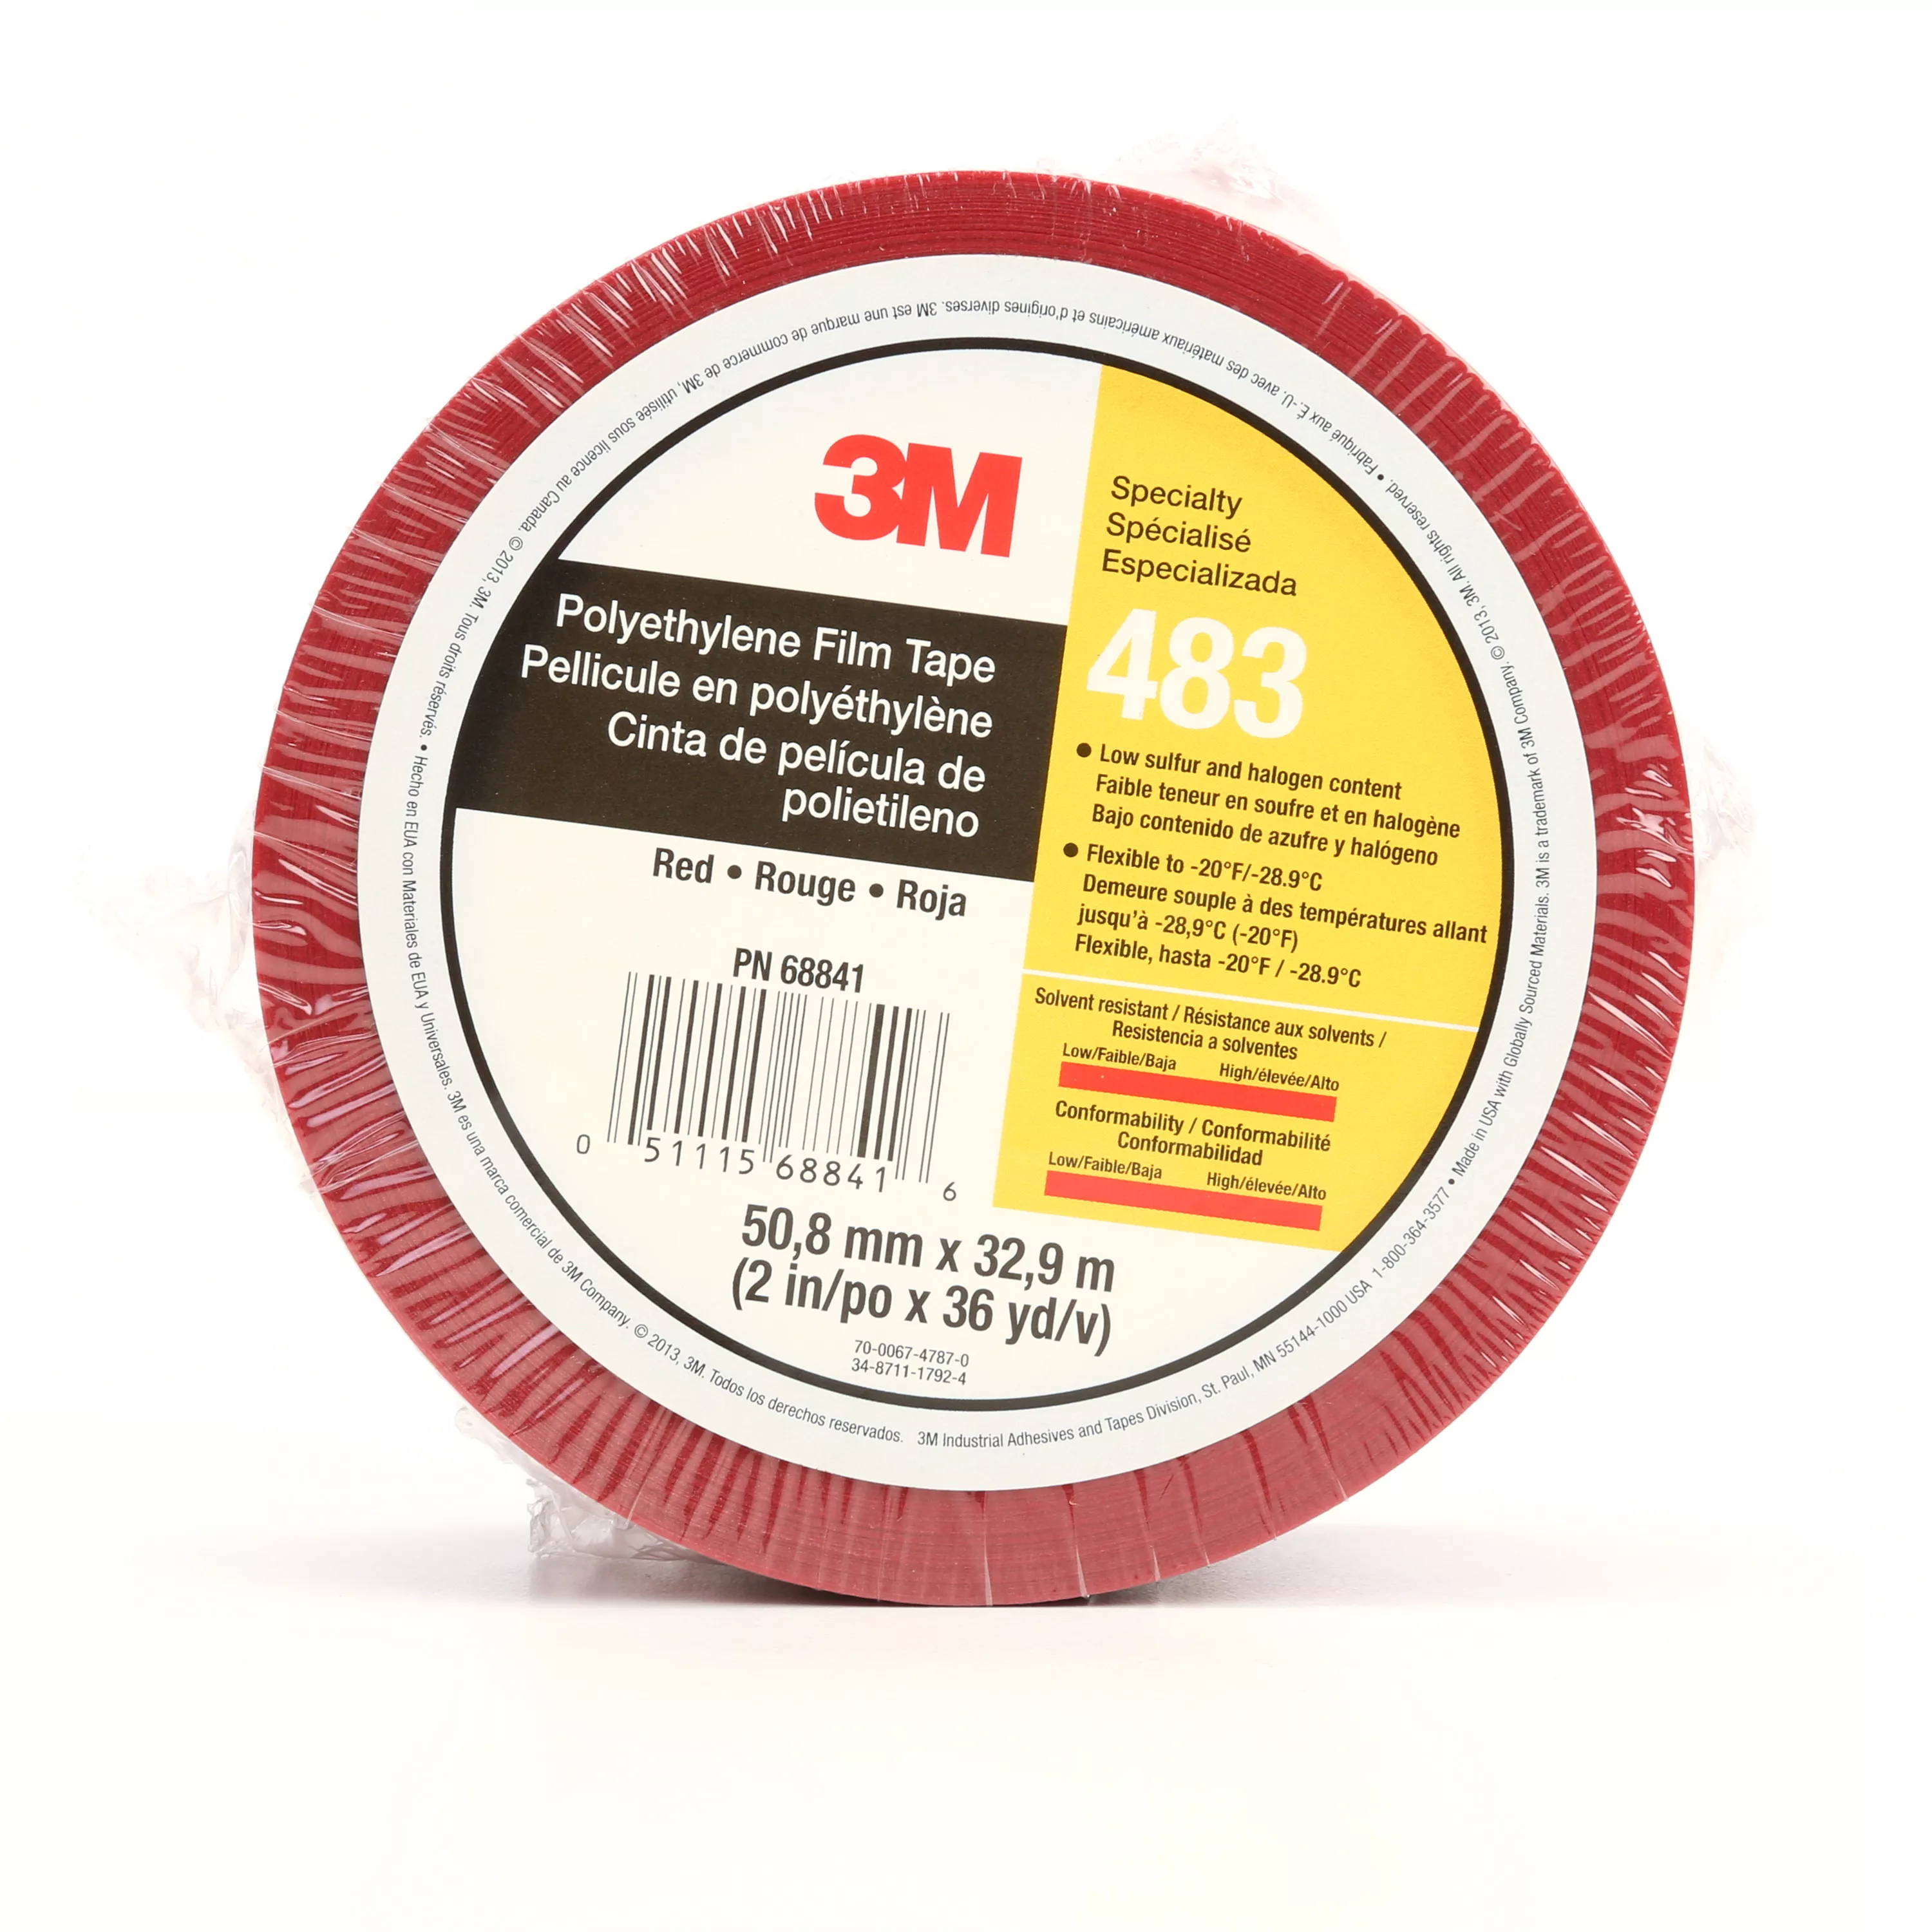 3M™ Polyethylene Tape 483, Red, 2 in x 36 yd, 5.0 mil, 24 Roll/Case,
Individually Wrapped Conveniently Packaged